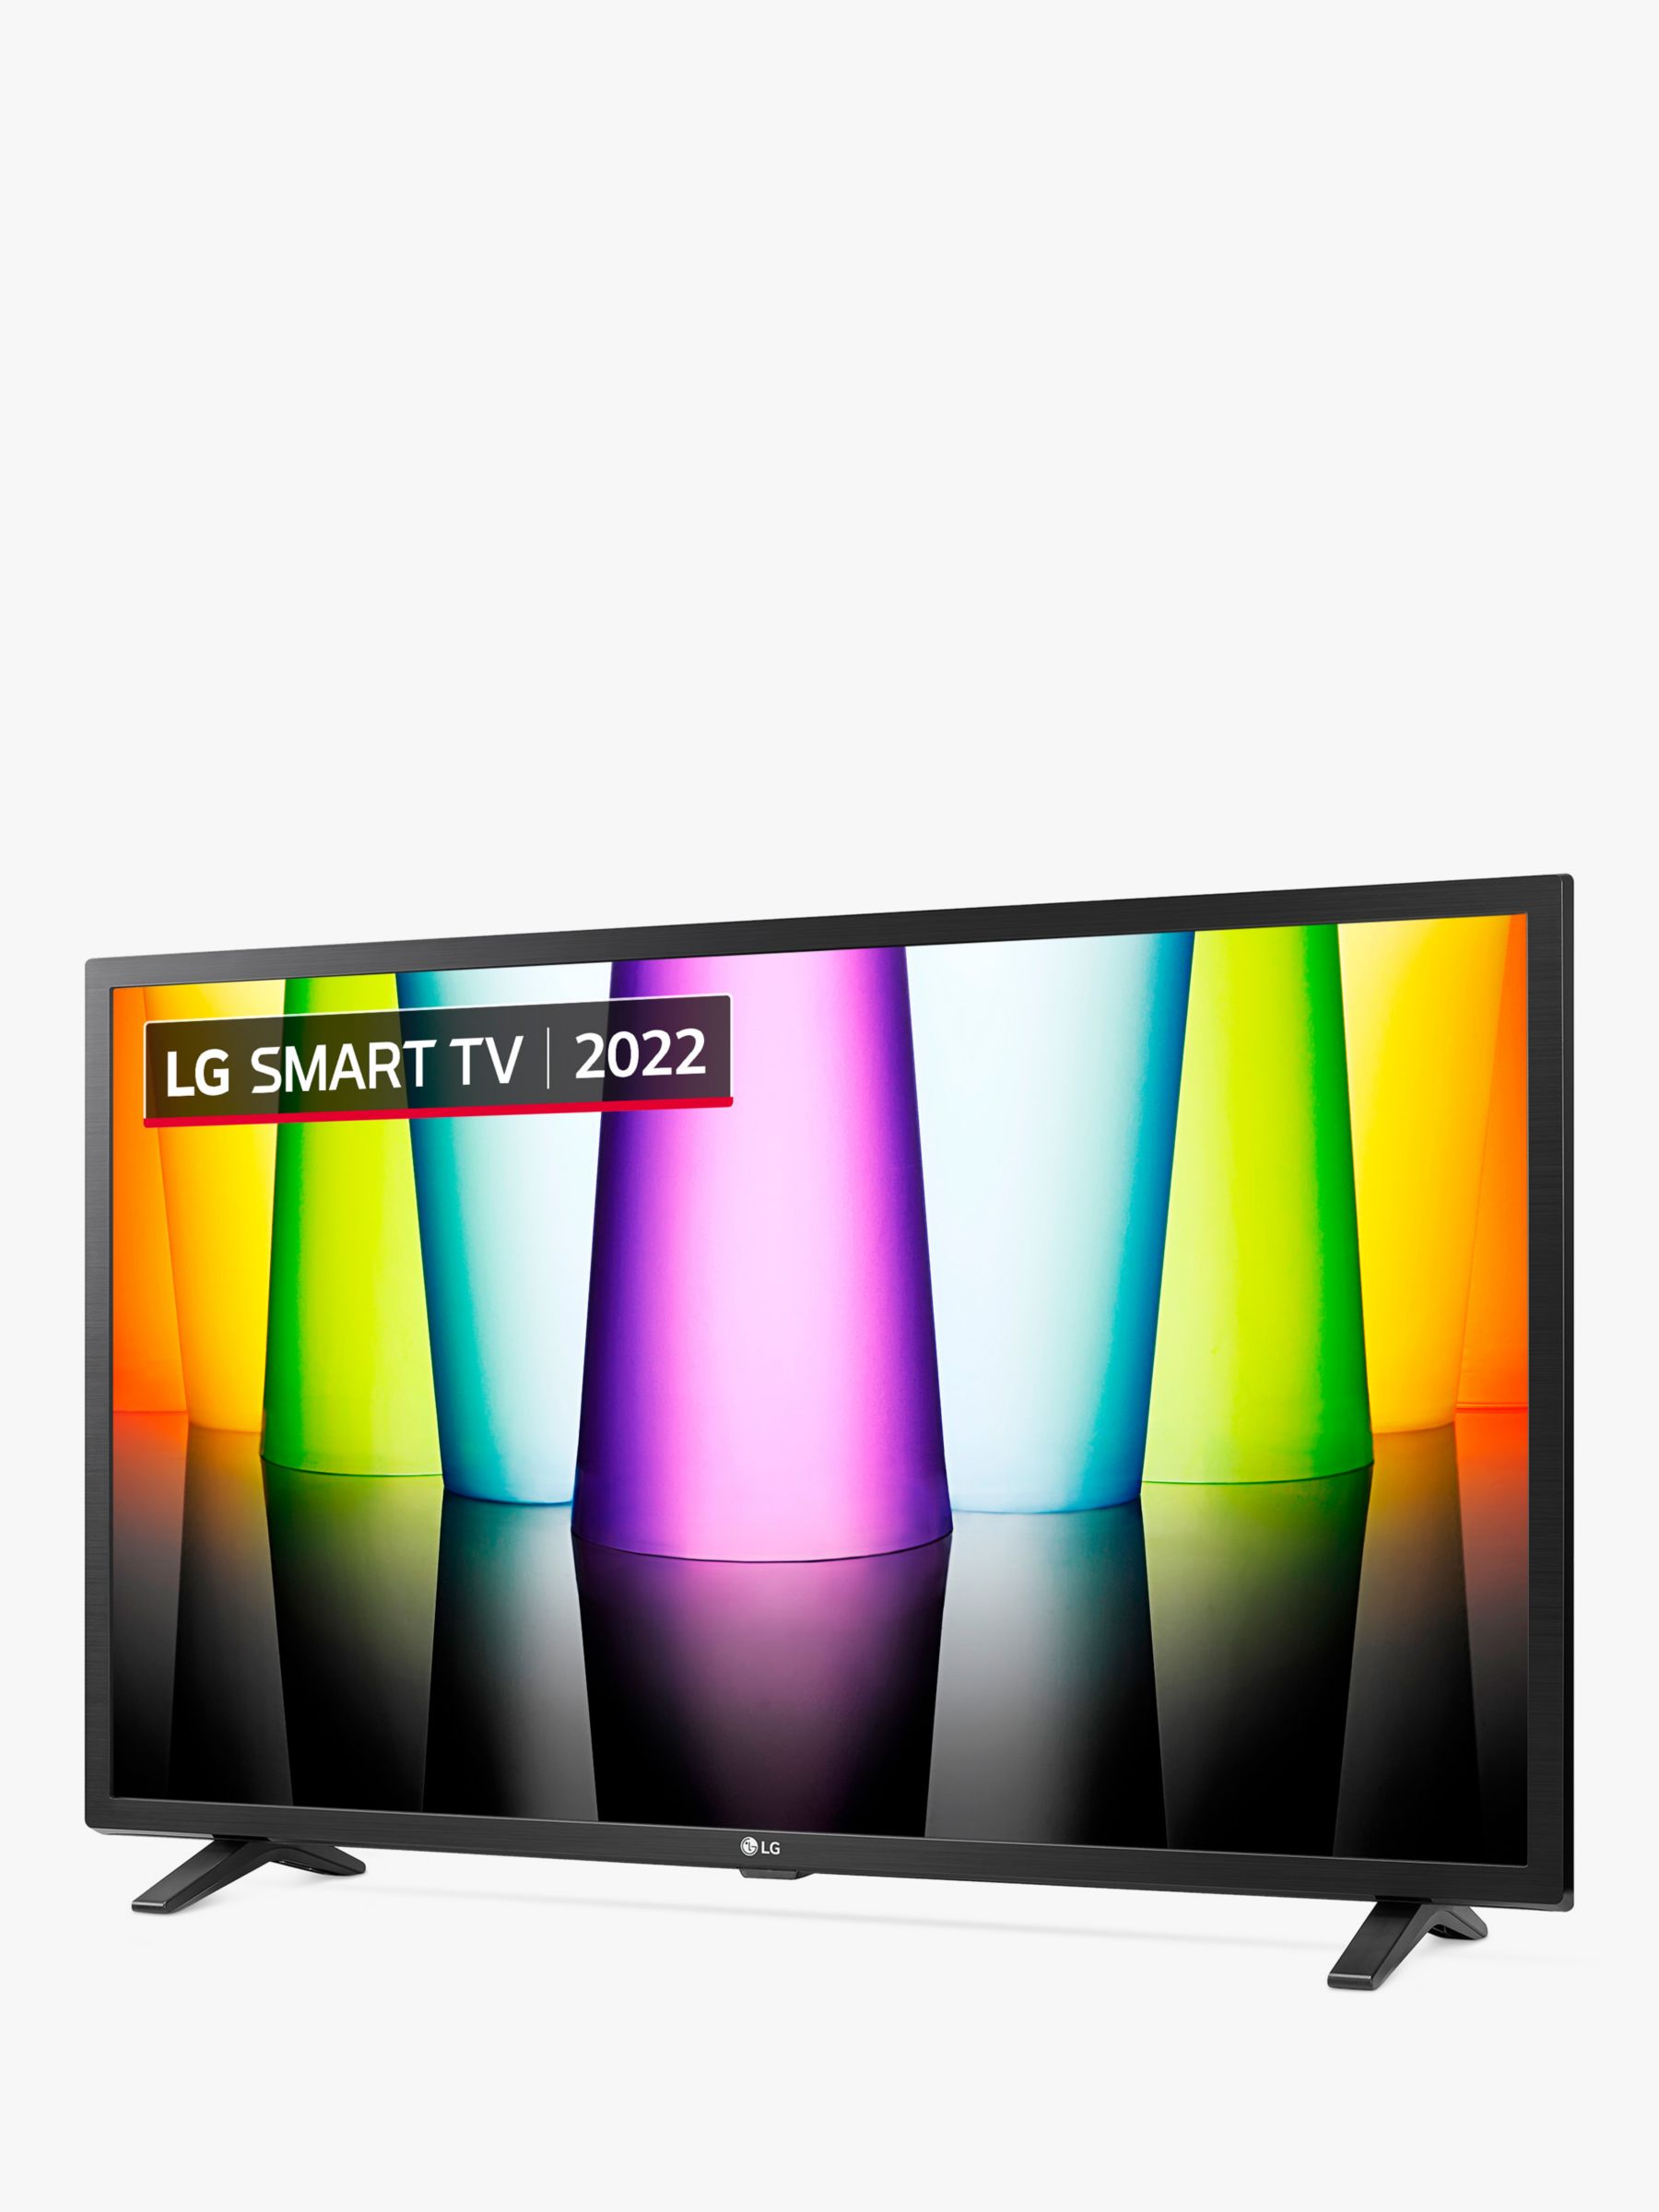 (2022) LED HDR HD Ready 720p Smart TV, 32 inch with Freeview HD/Freesat